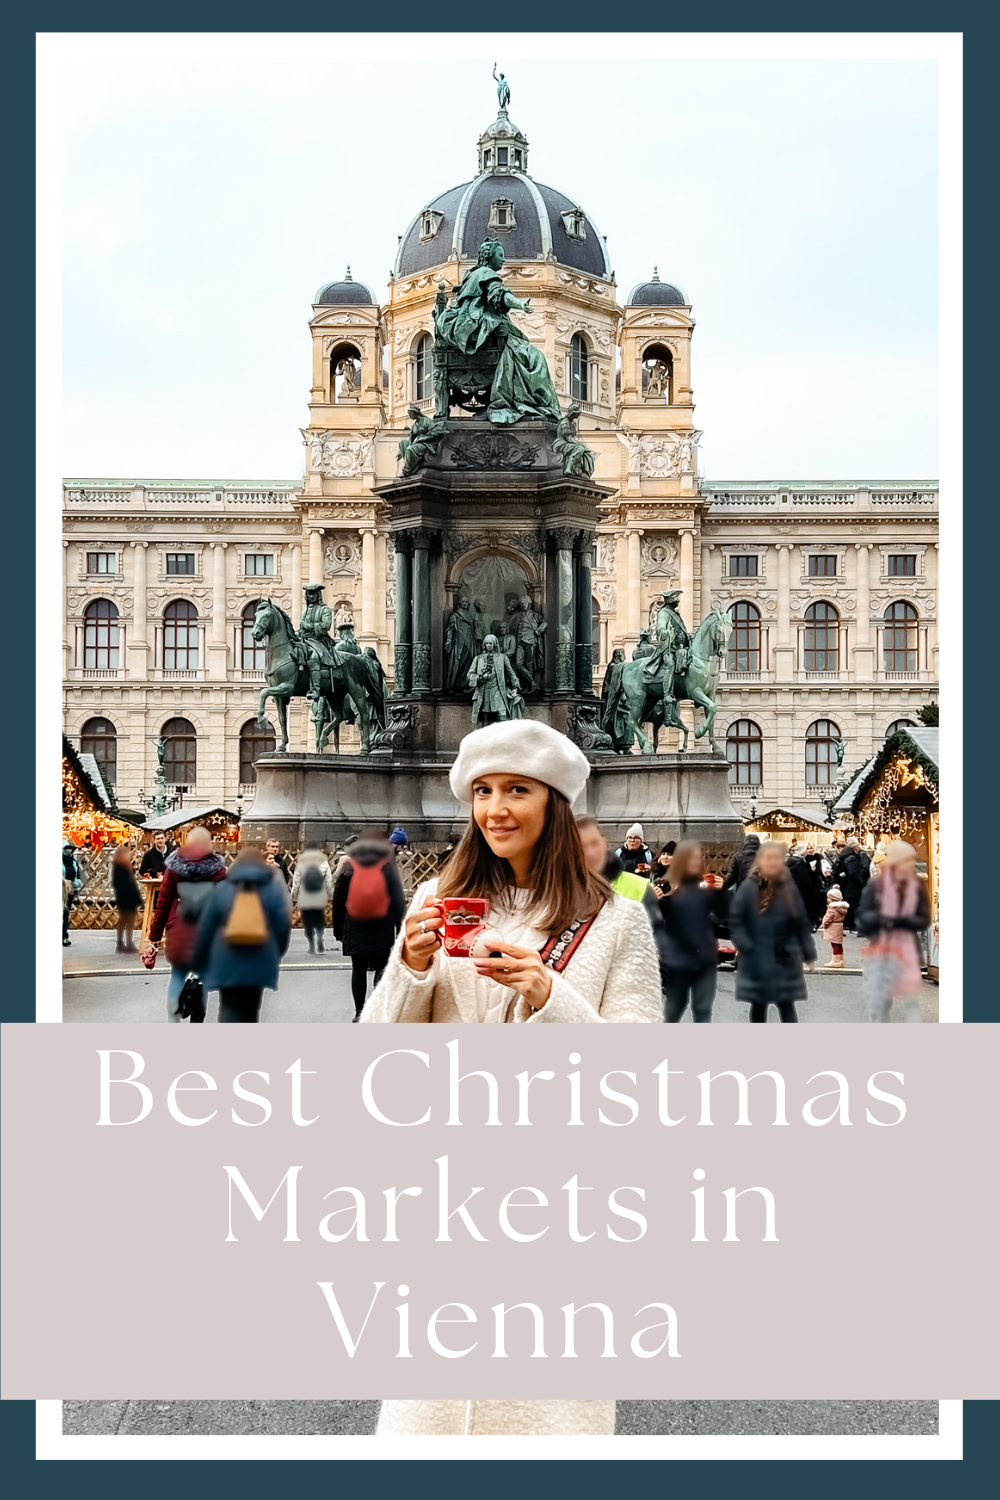 Best Christmas Markets in Vienna by My Next Pin